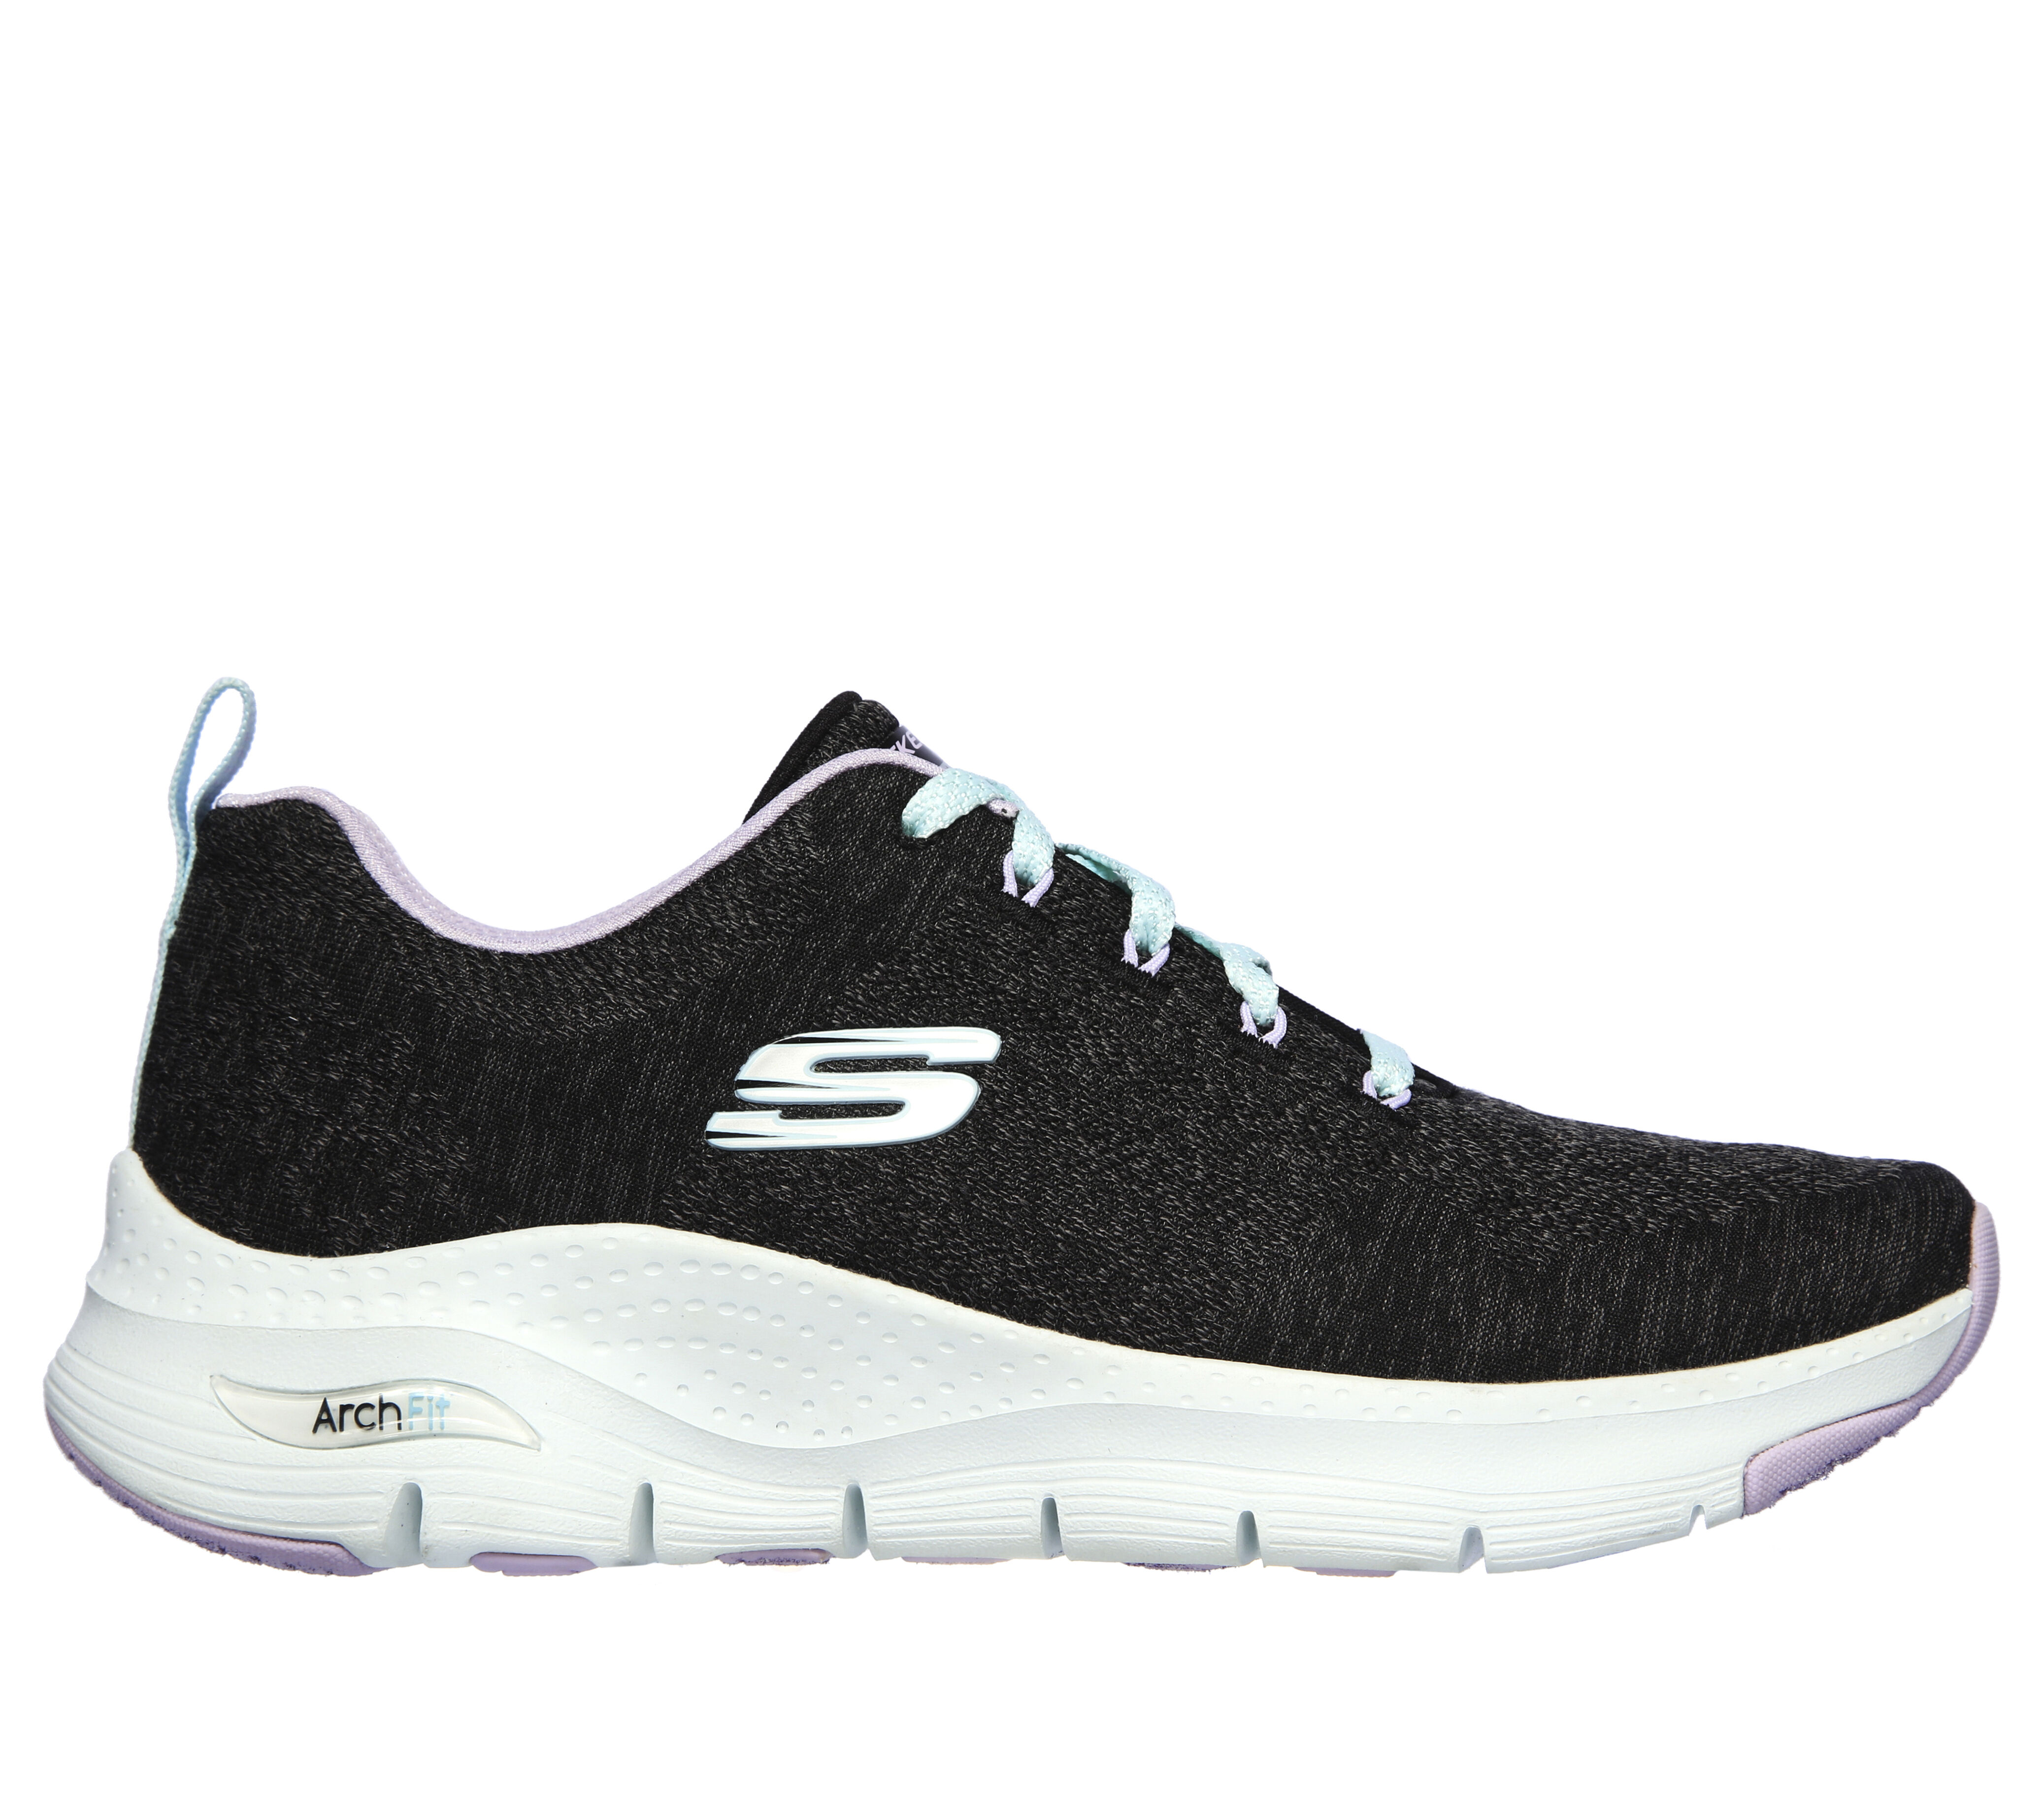 skechers white sports shoes